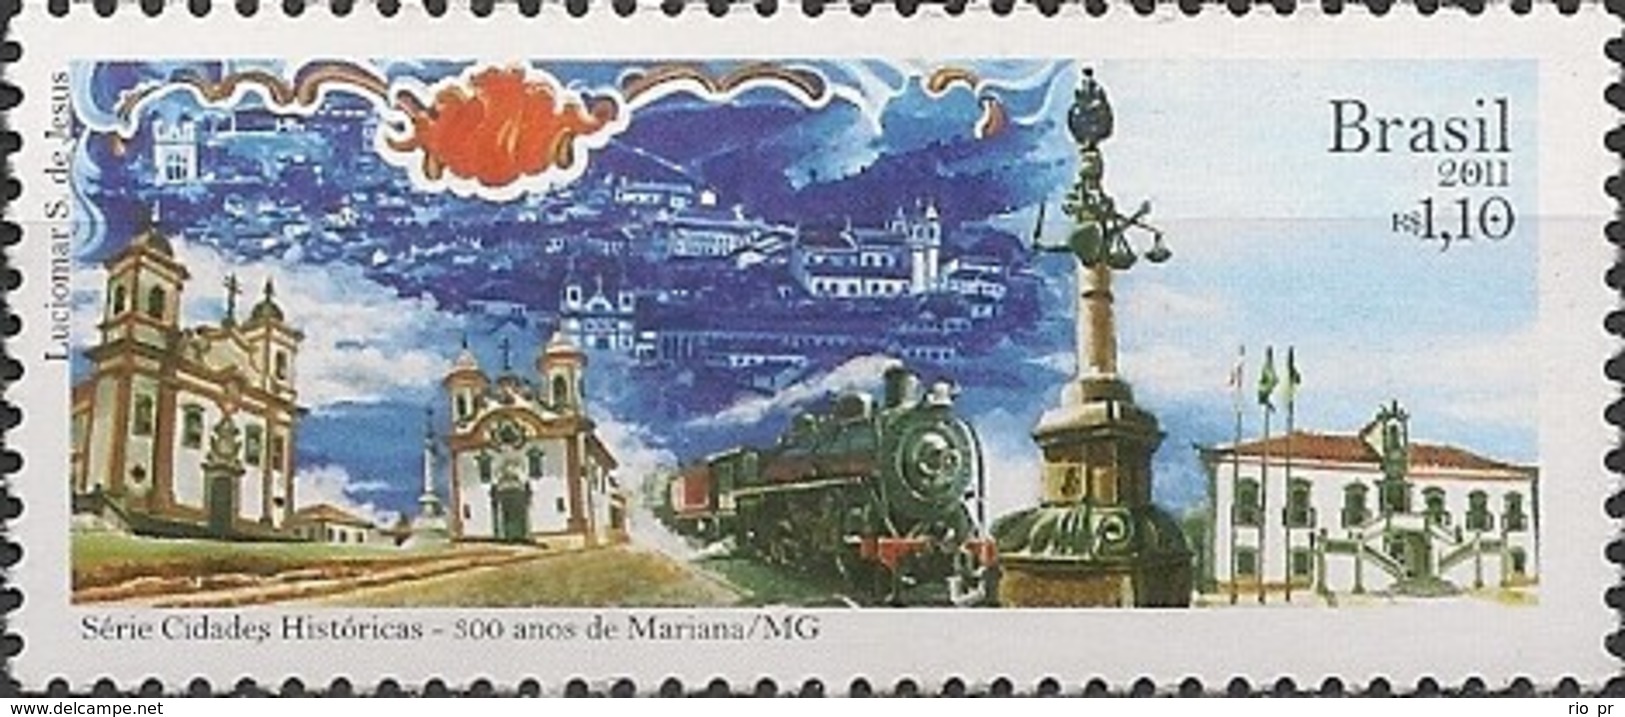 BRAZIL - HISTORICAL TOWNS SERIES, 300 YEARS OF MARIANA/MG 2011 - MNH - Neufs